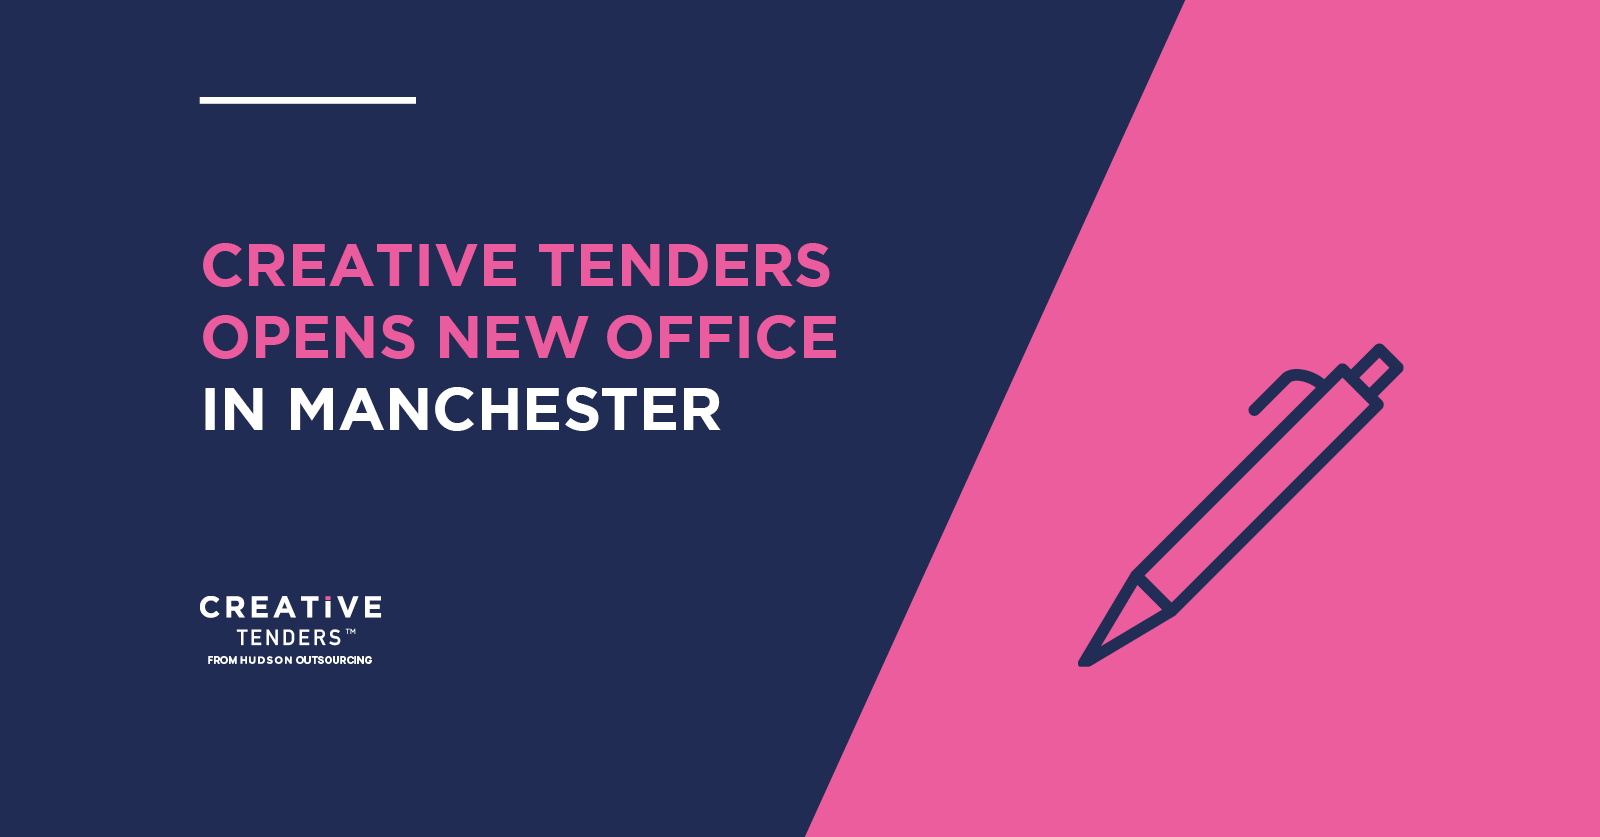 Creative Tenders Opens New Office in Manchester